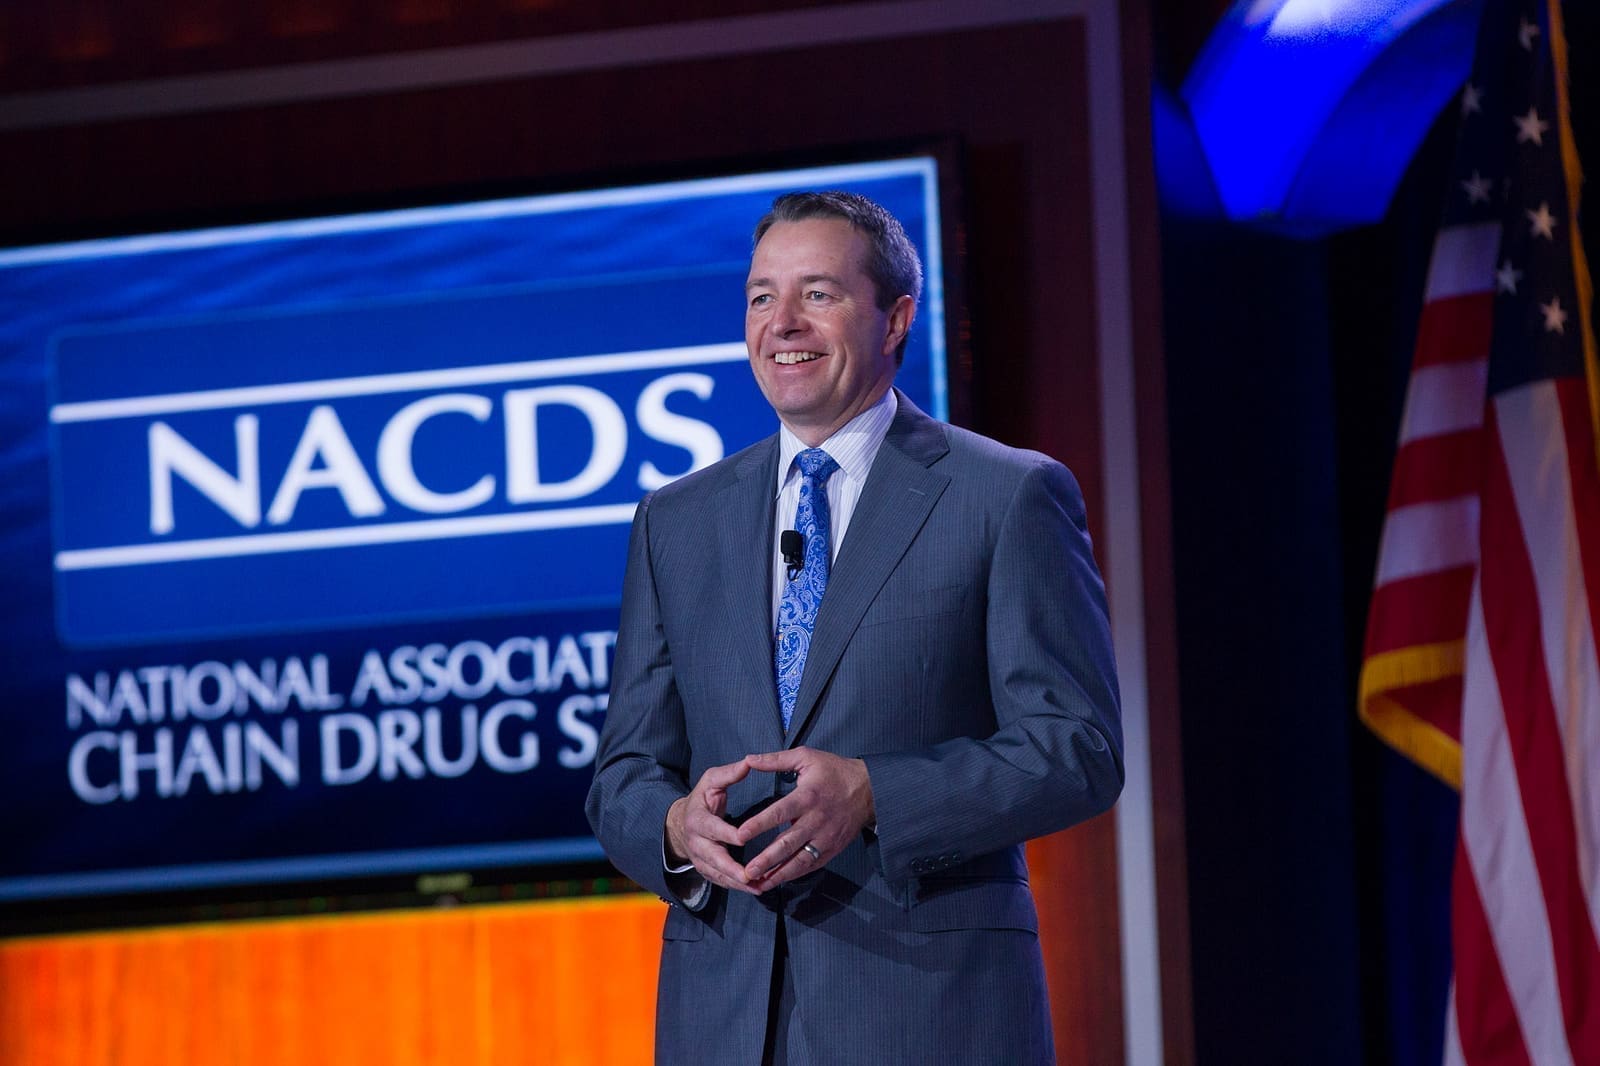 NACDS Chairman John Standley, chairman and chief executive officer of Rite Aid Corporation, said, "We’ve made critical progress toward reaching our full potential as an industry,” at the 2015 NACDS Annual Meeting.